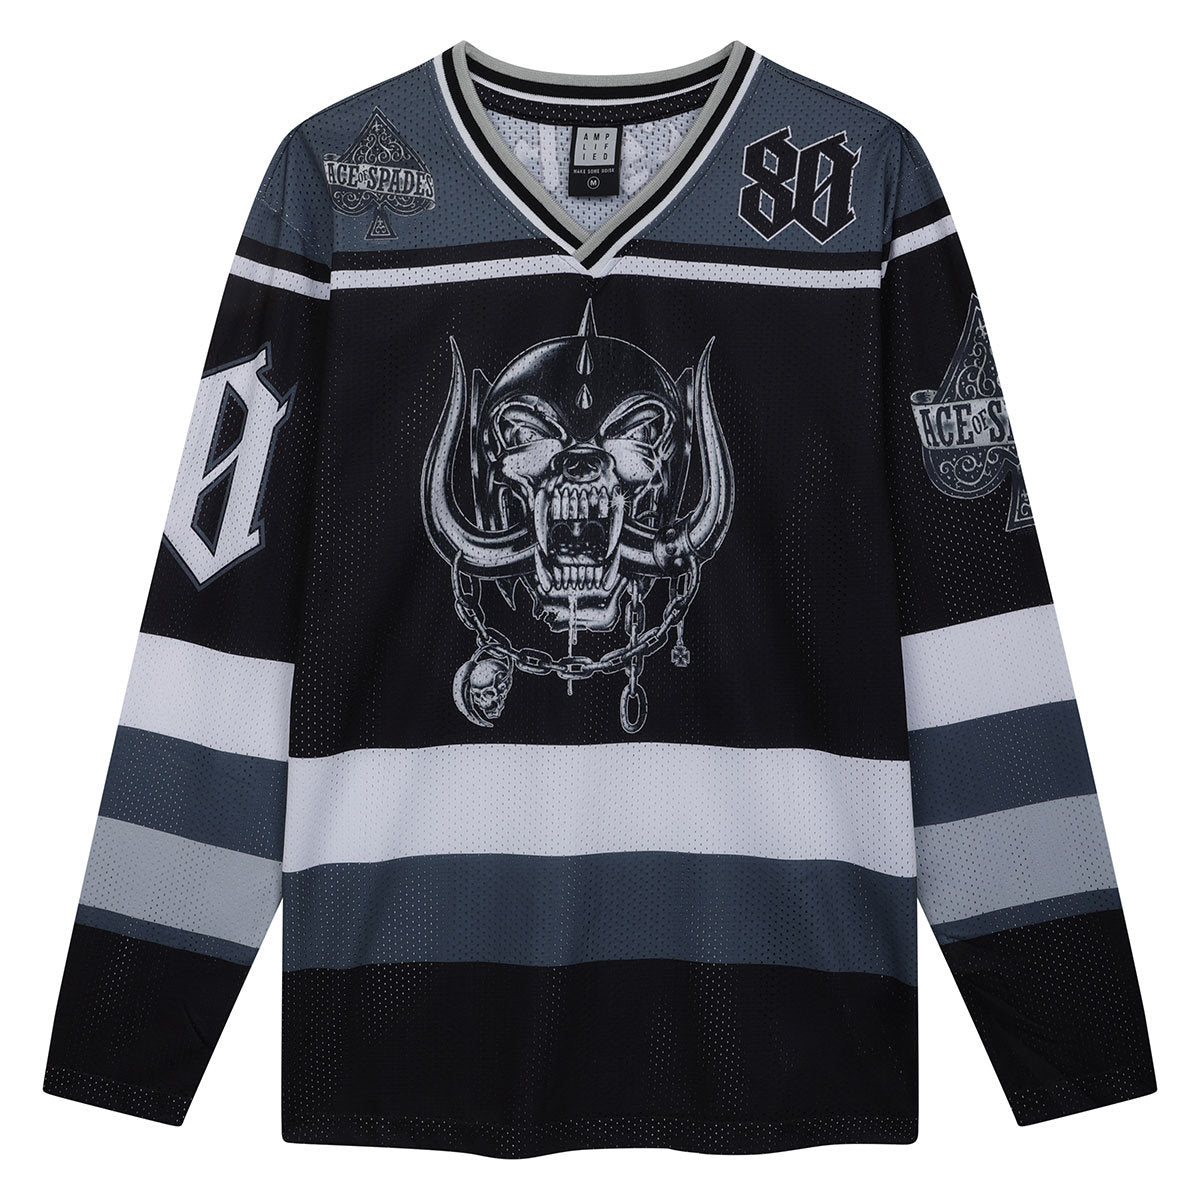 Amplified Motorhead Hockey Jersey - Official Licensed Product